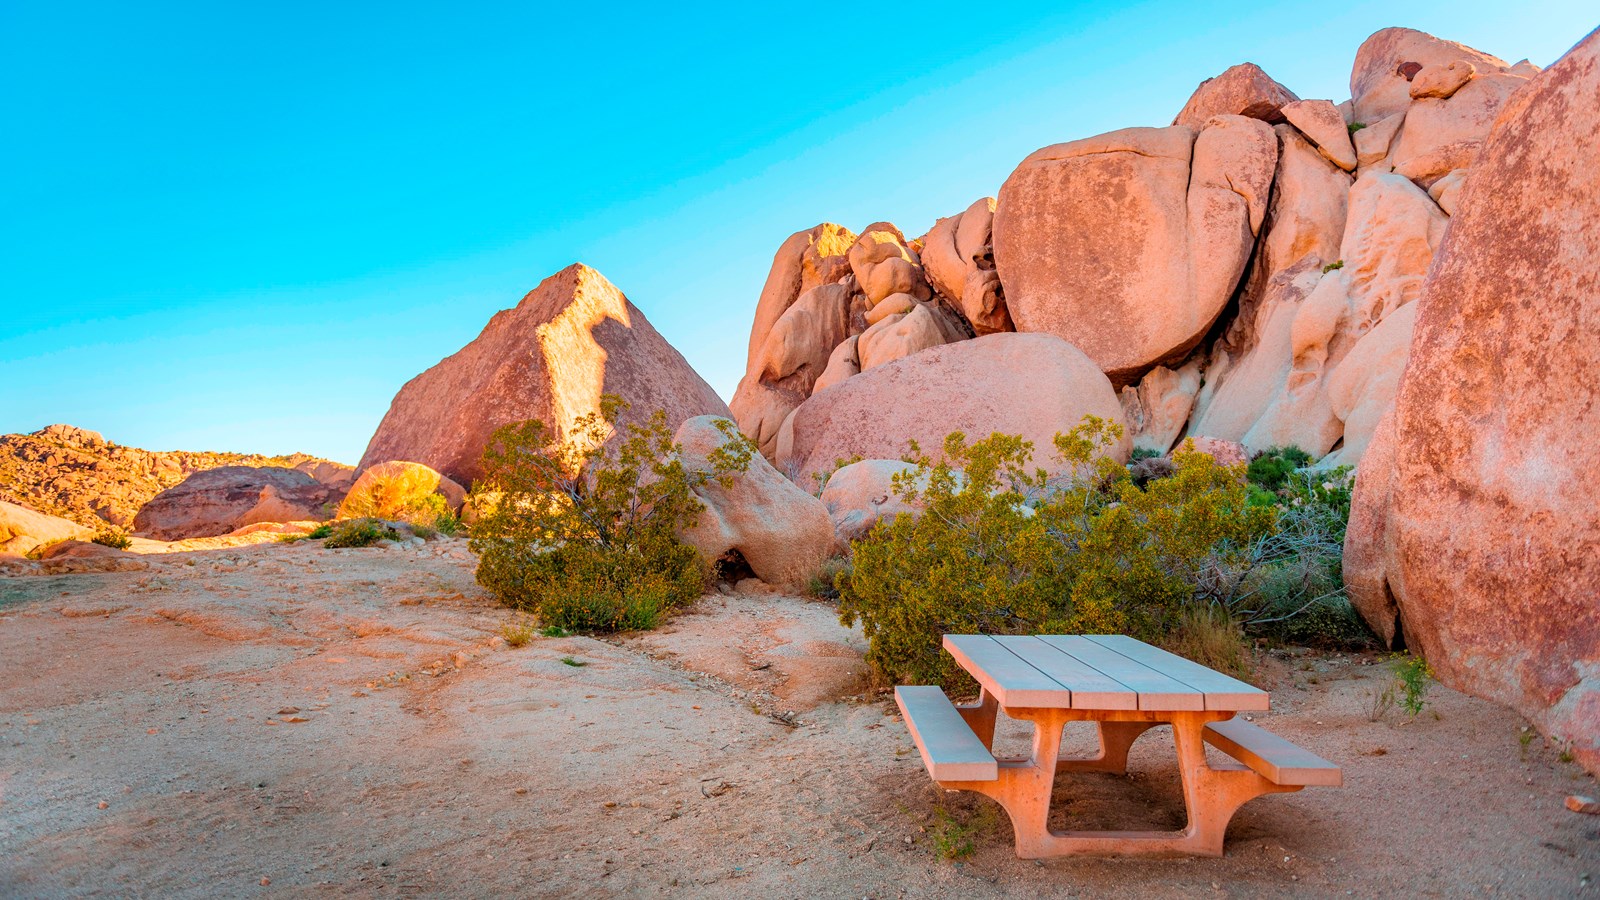 A picnic table in front of small shrubs and a rock formation.